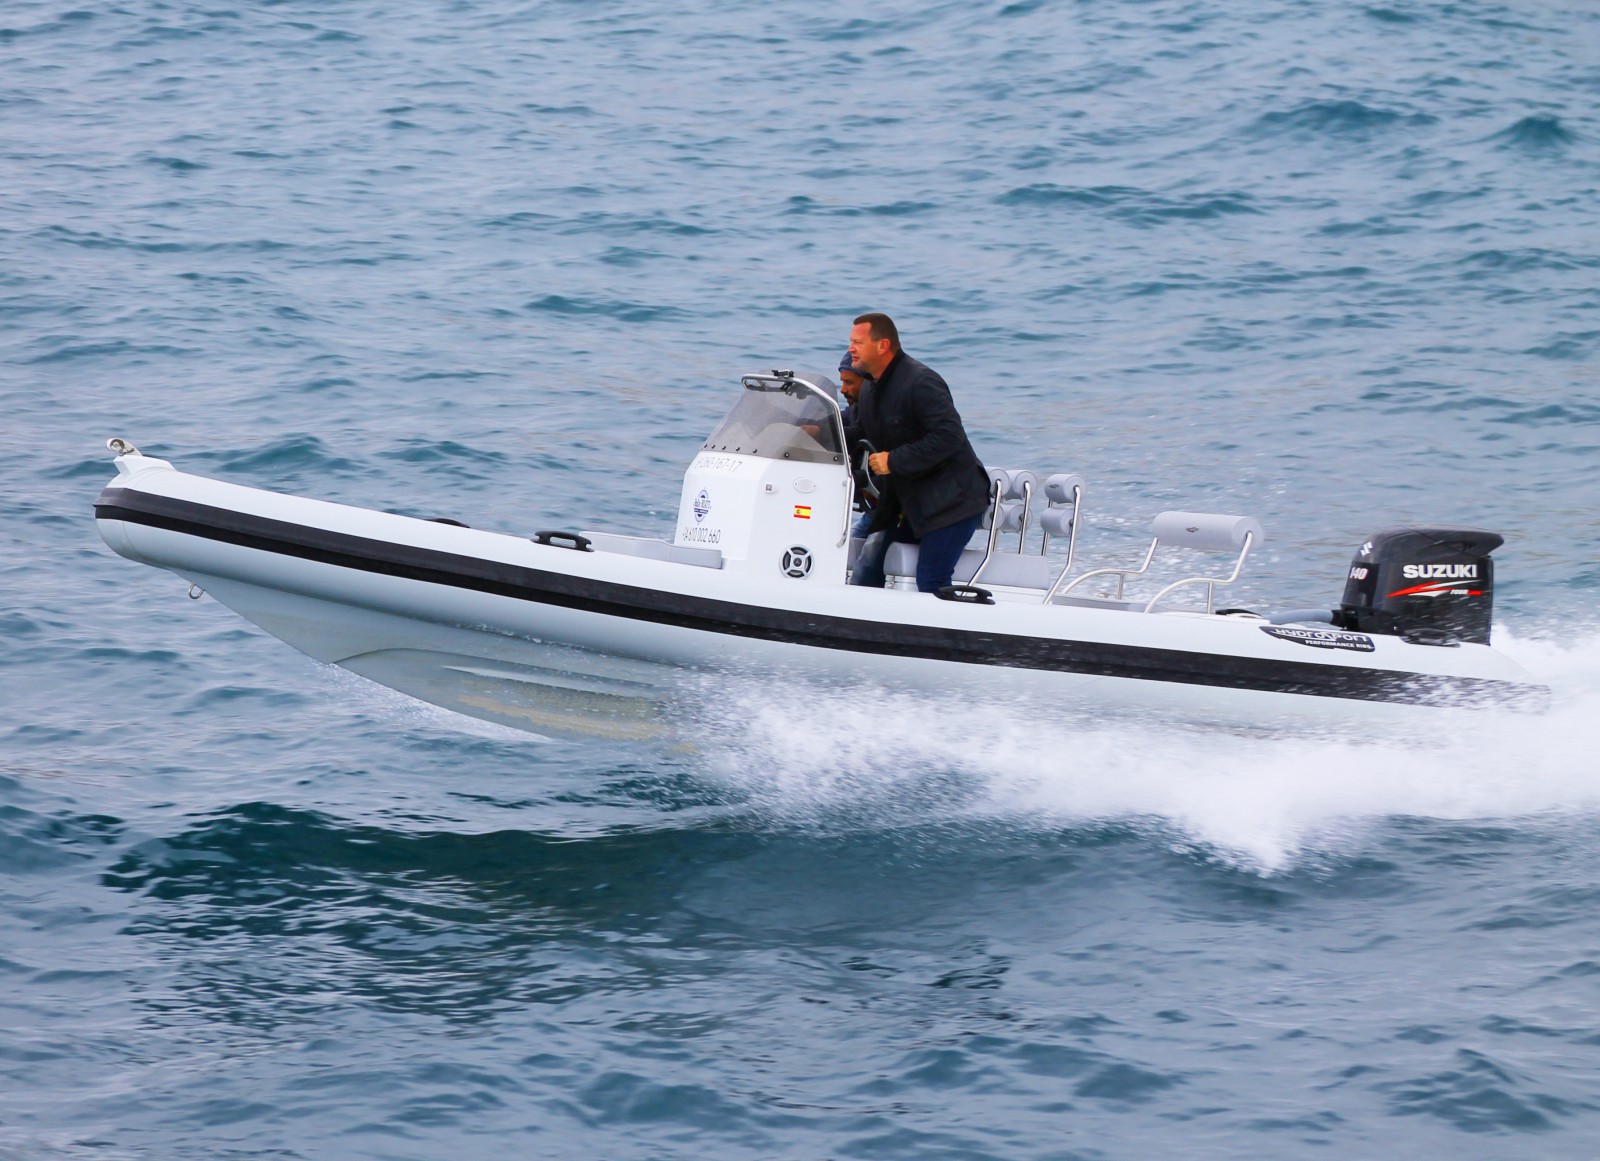 News: RoDa Boats became importer of Hydrosport Ribs in Spain.